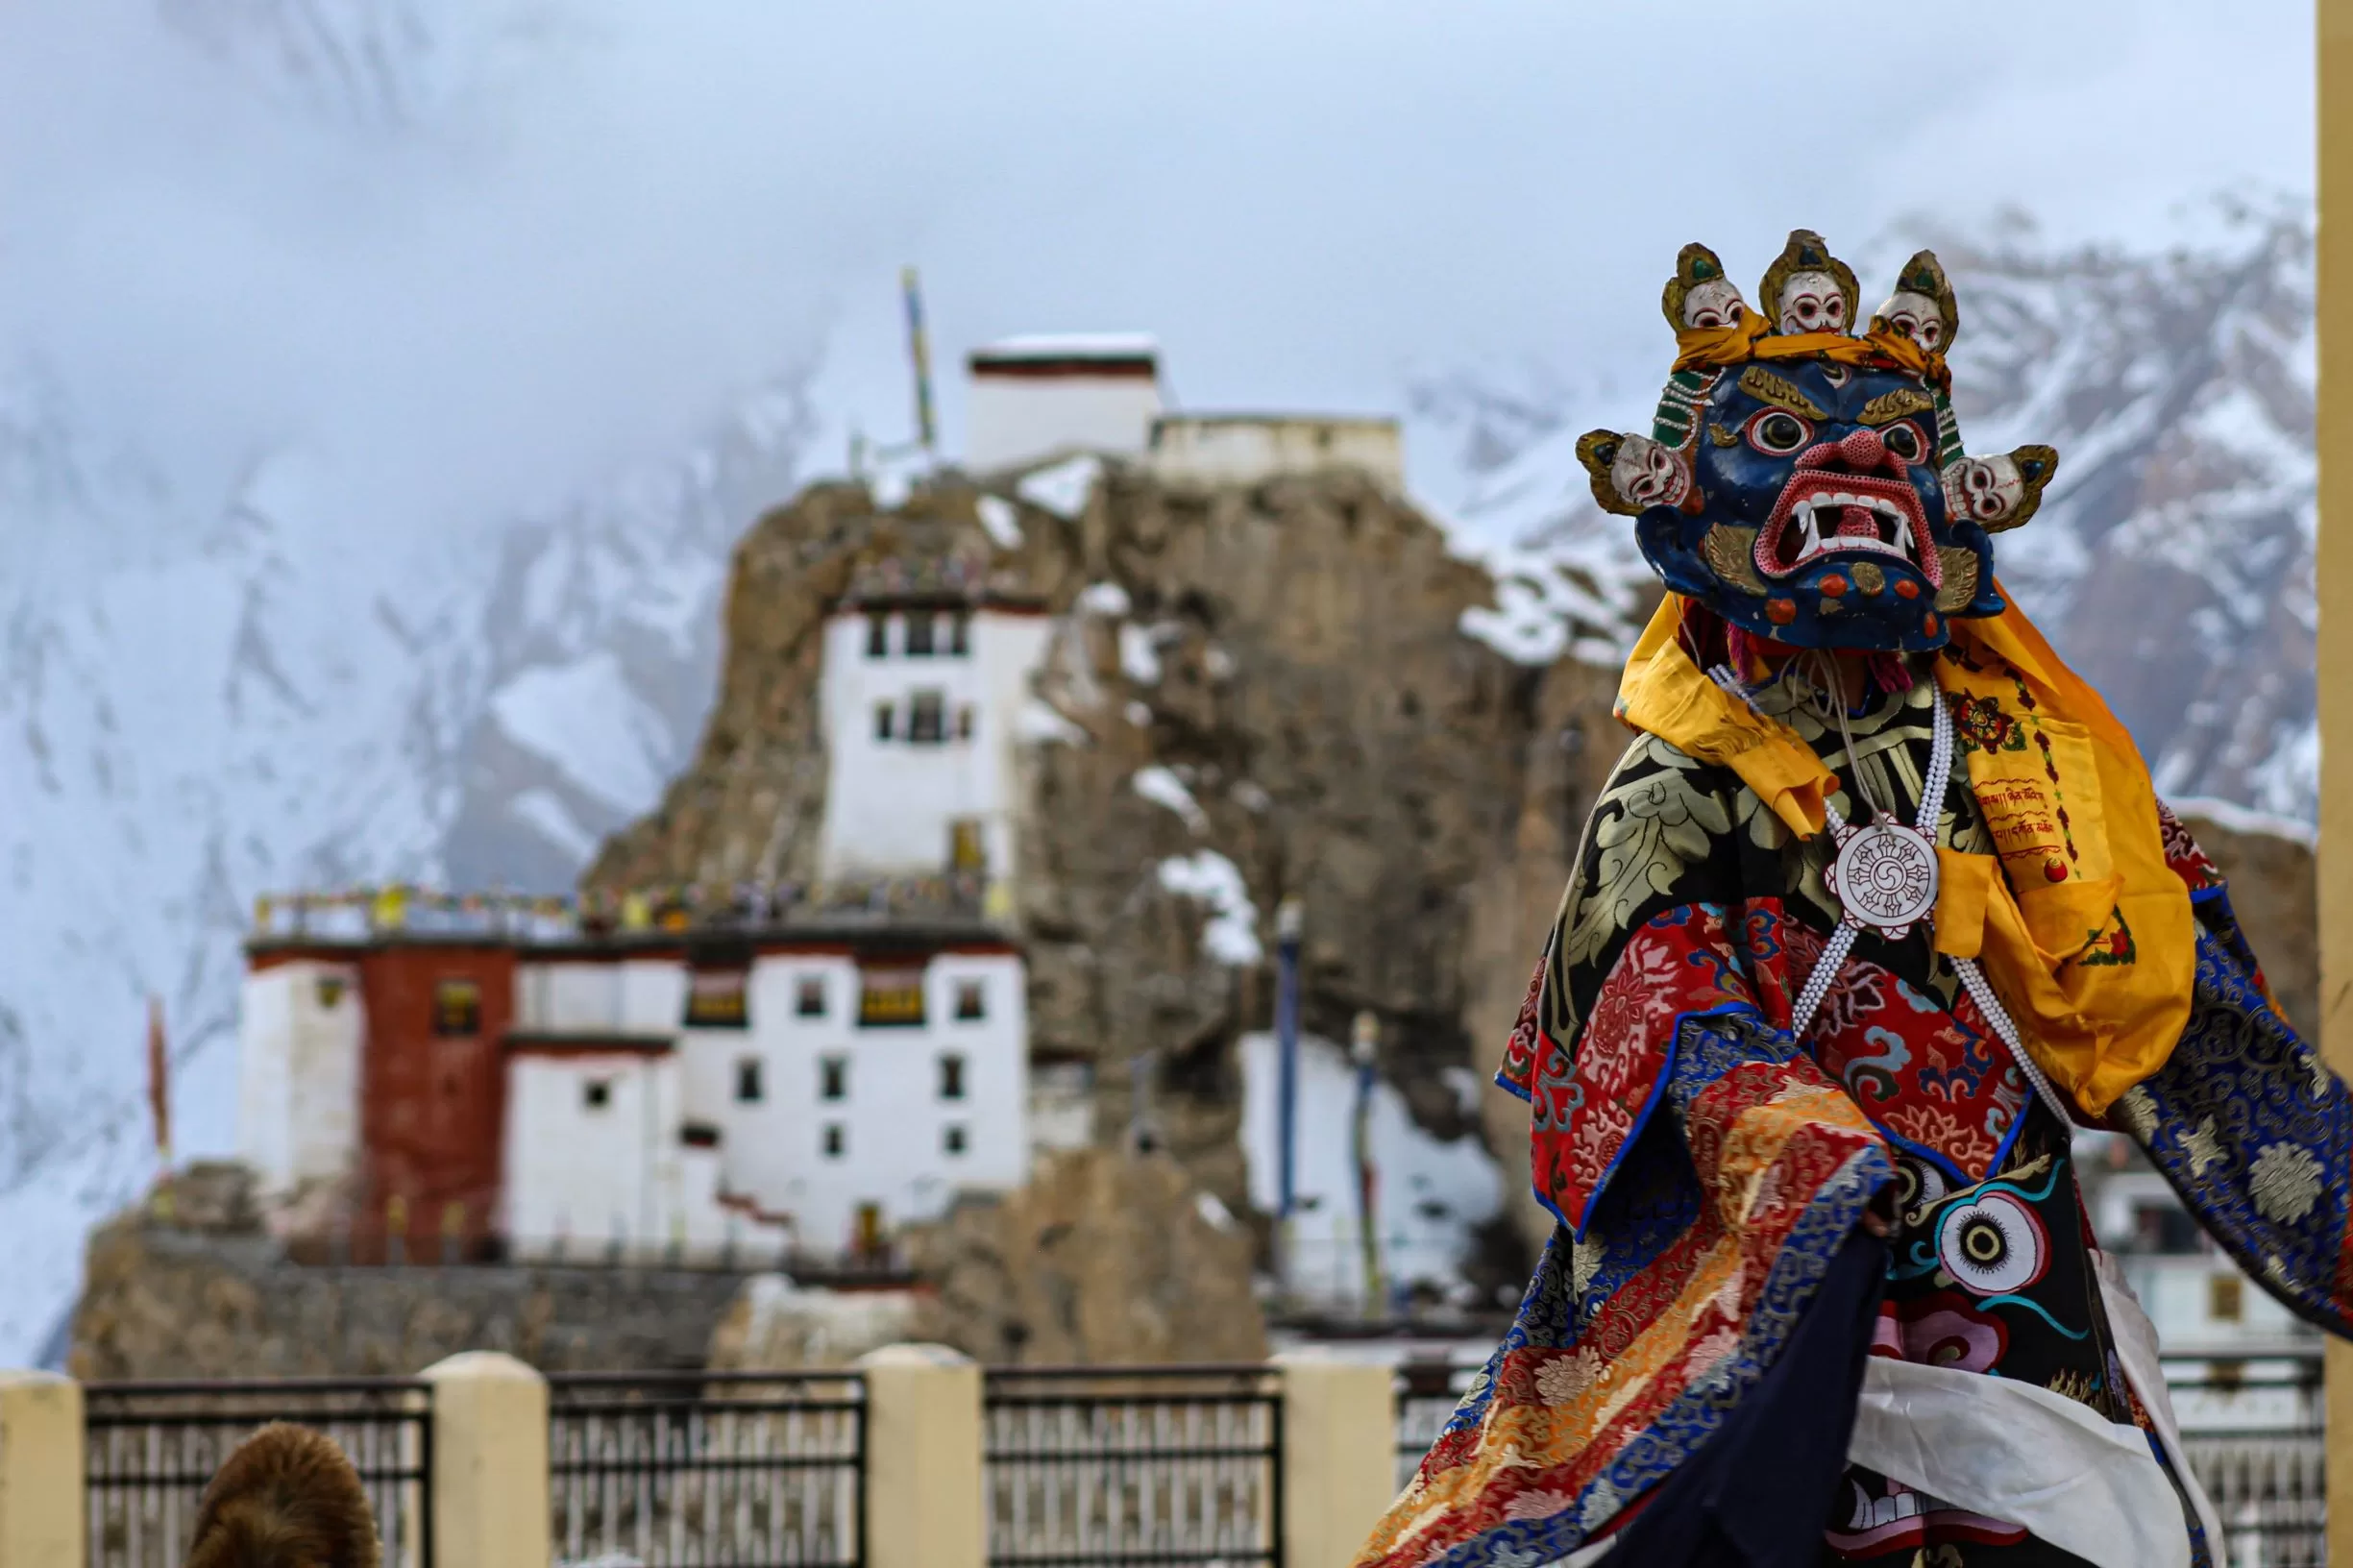 A Festive Peak Into The Rich Cultural Heritage of Lahaul and Spiti